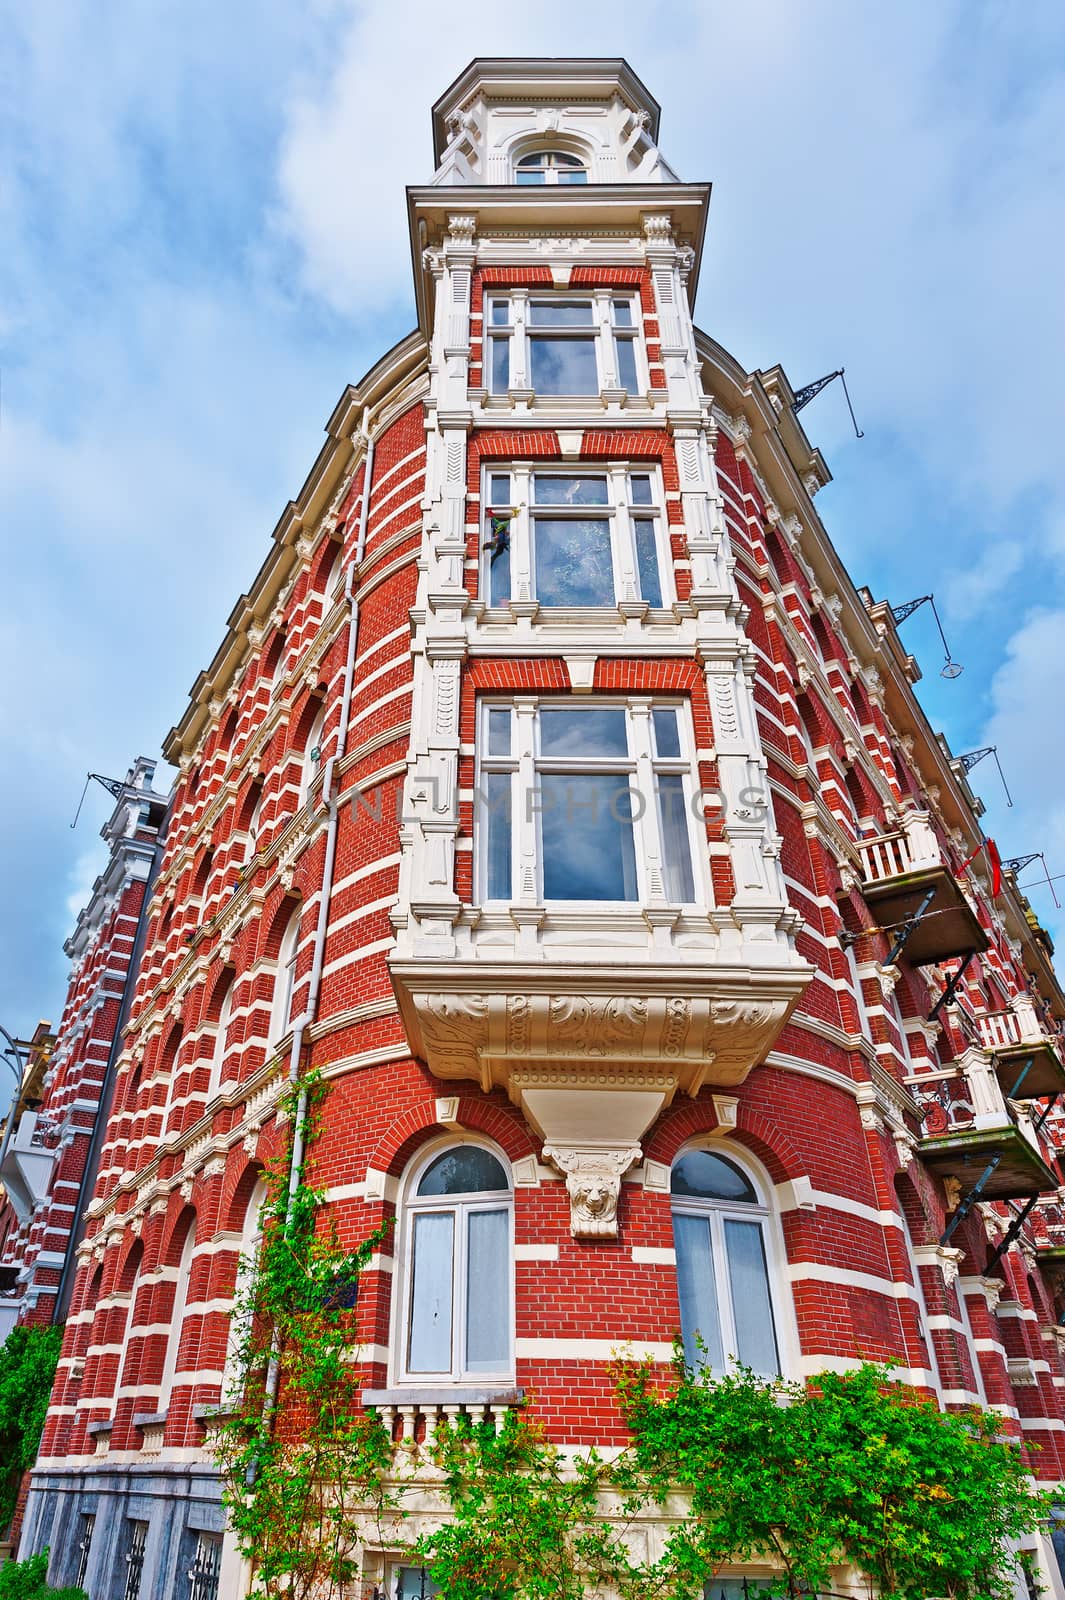 The Flemish Facade in the Dutch City of Amsterdam